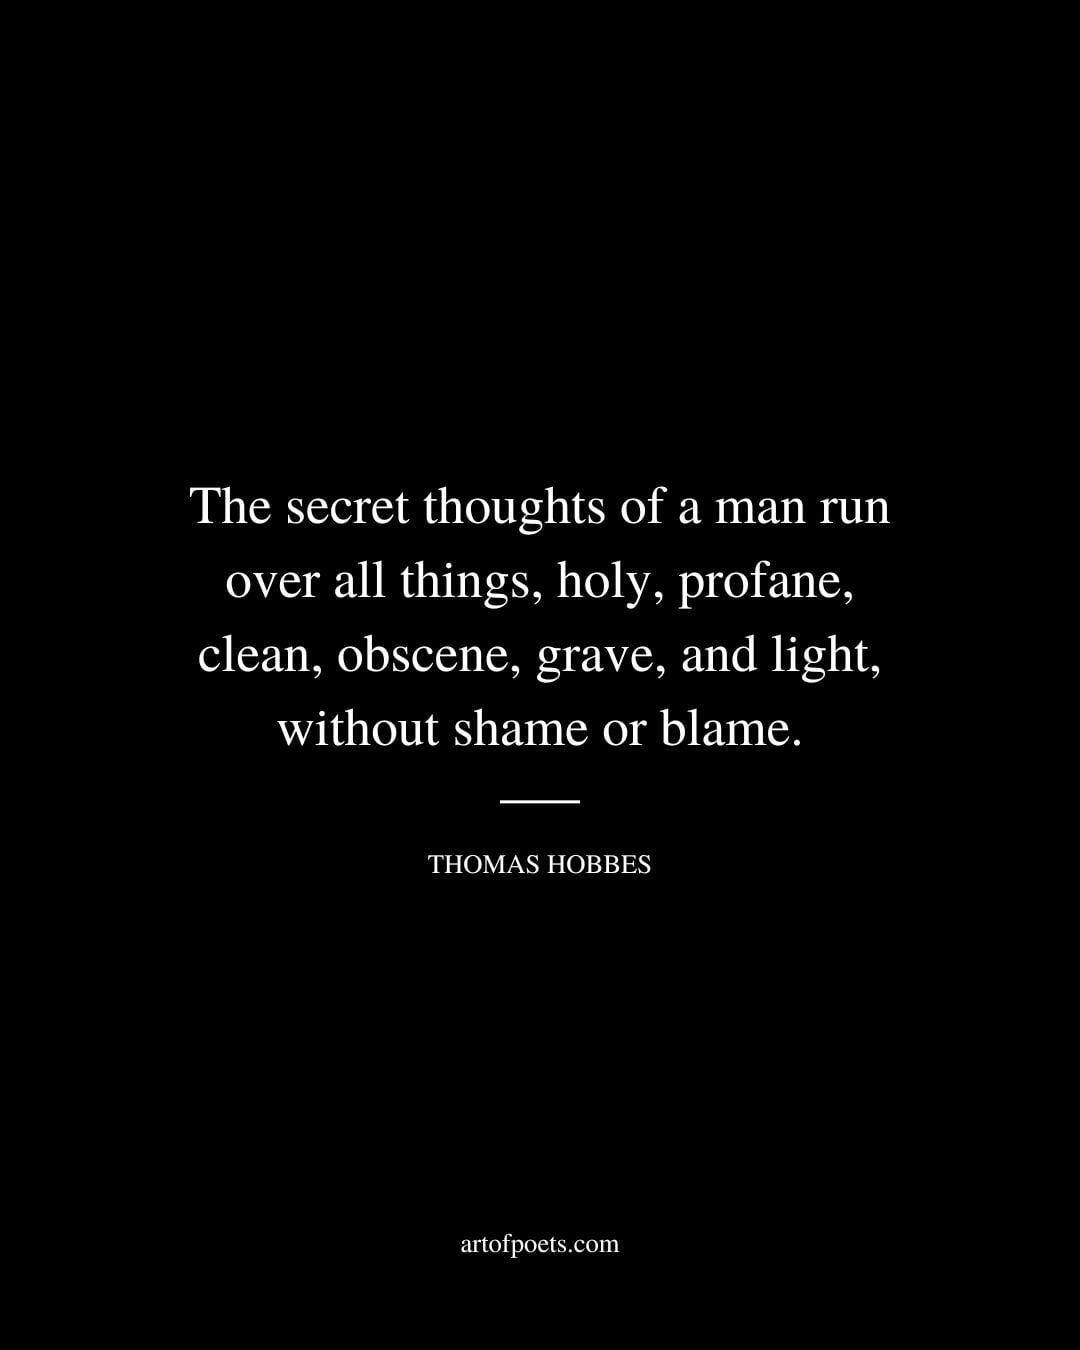 The secret thoughts of a man run over all things holy profane clean obscene grave and light without shame or blame